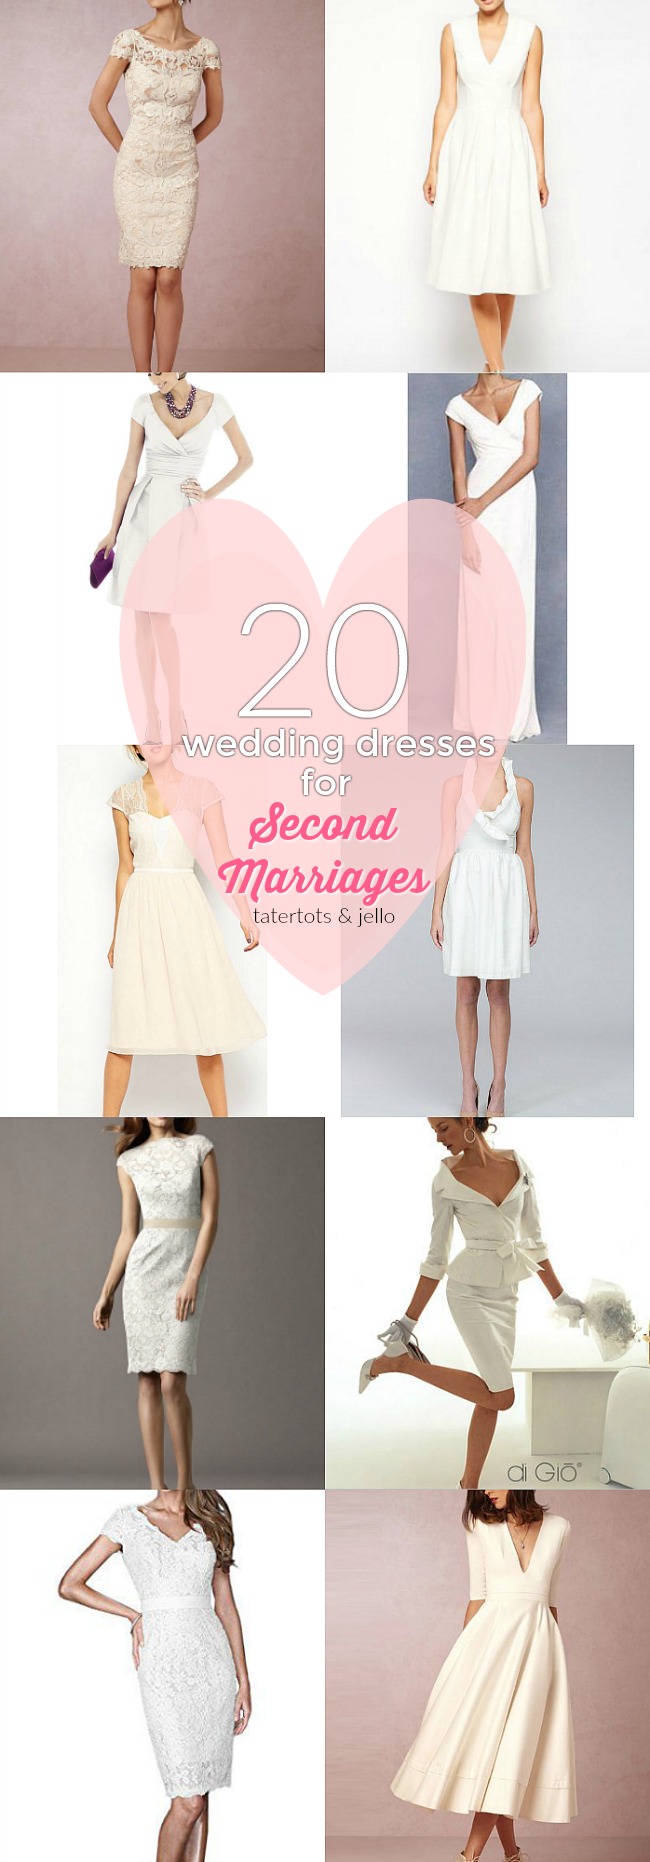 20 wedding dresses for second marriages and courthouse weddings tatertots and jello